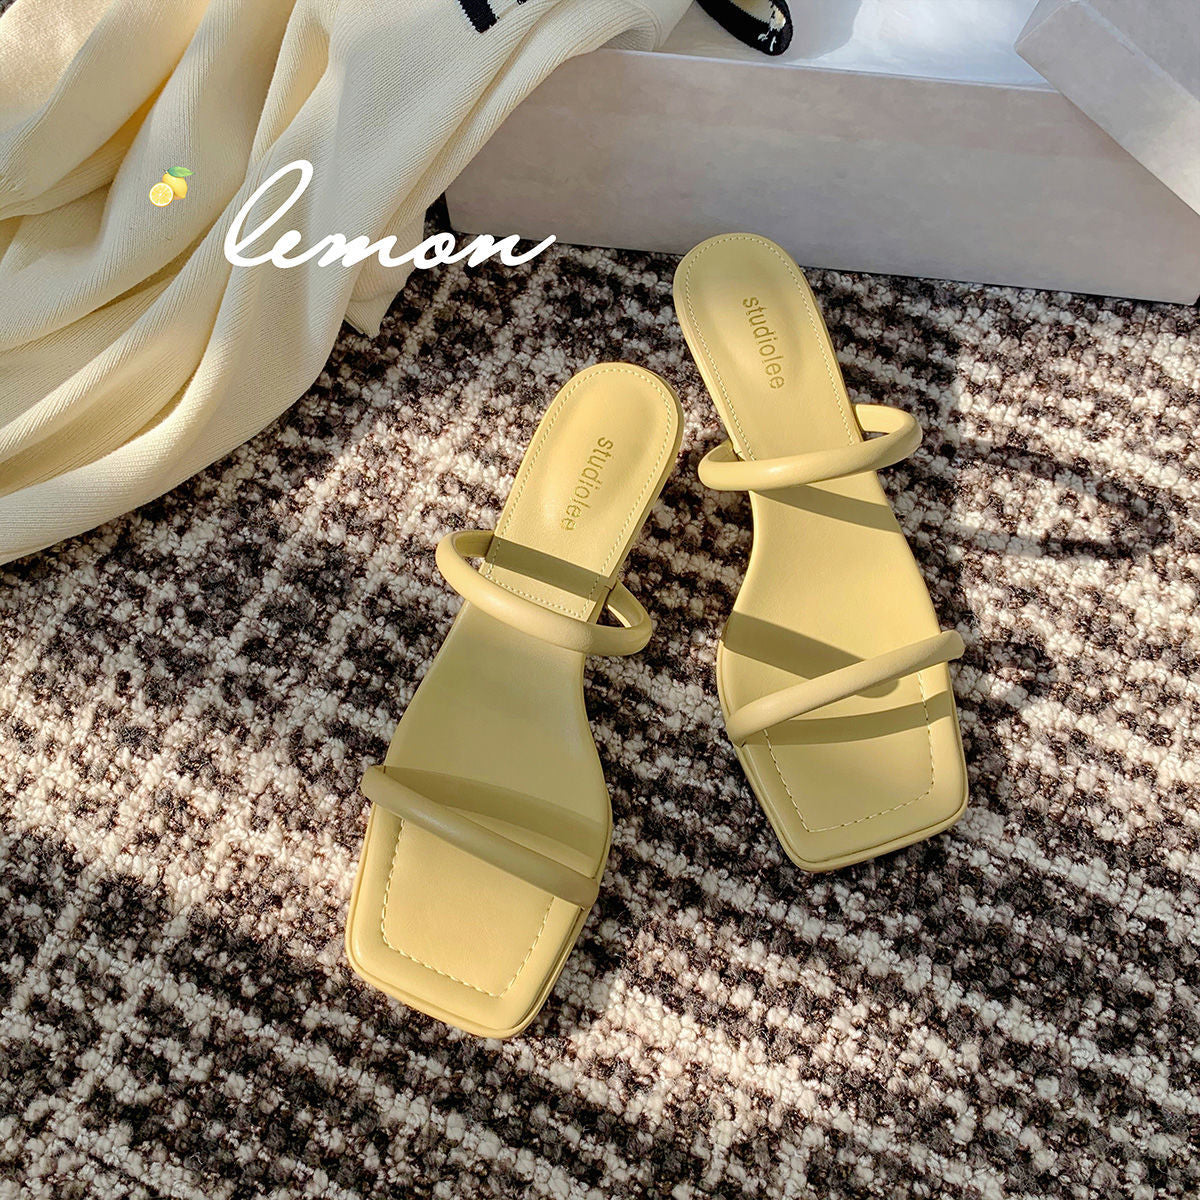 2022 New Summer One-Strap Square Toe Open Toe Sandals Fashionable Elegant All-Match High Heel Sandals for Women